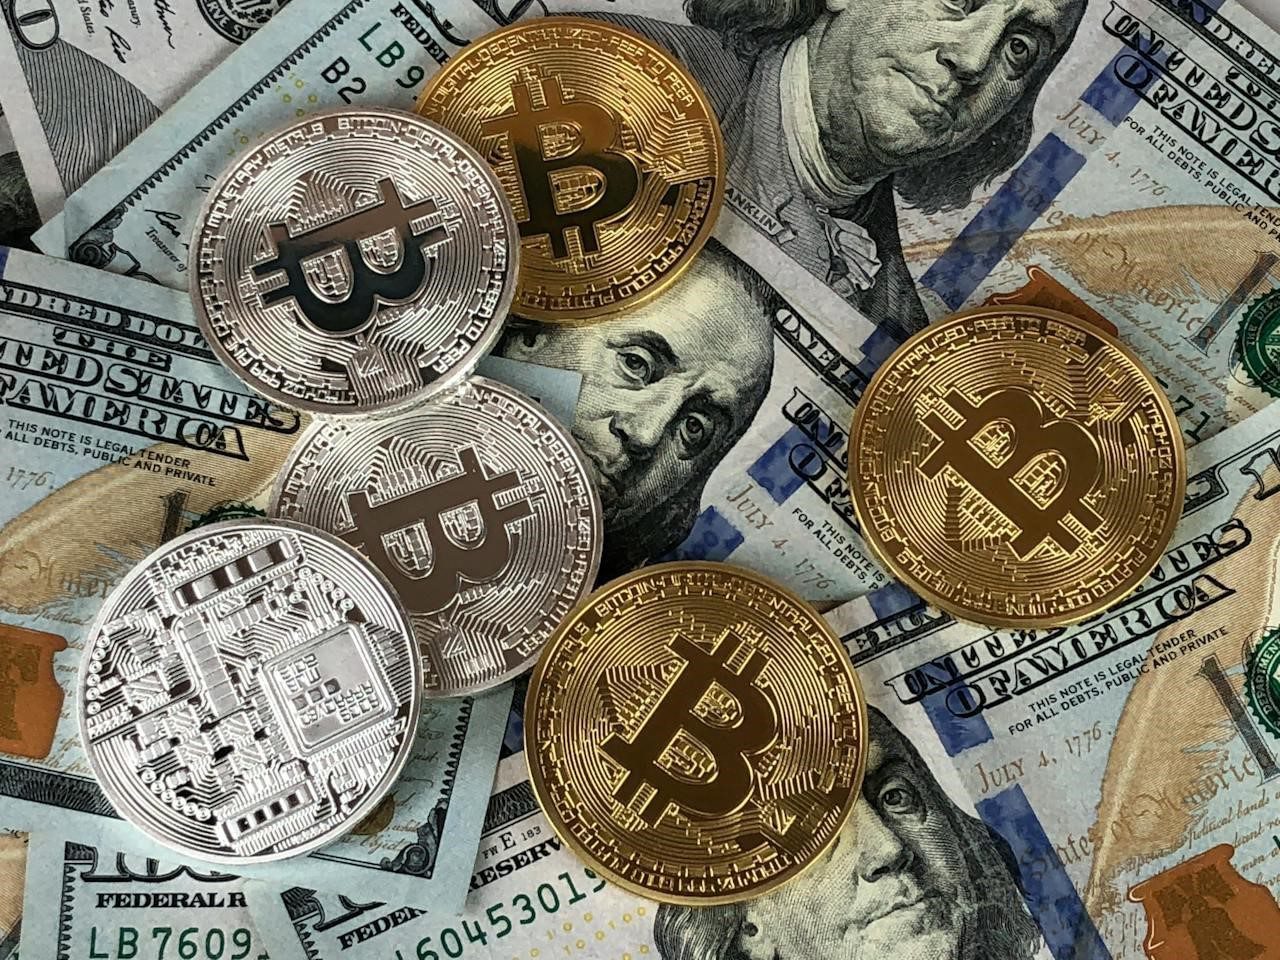 Silver and gold coins with Bitcoin logo